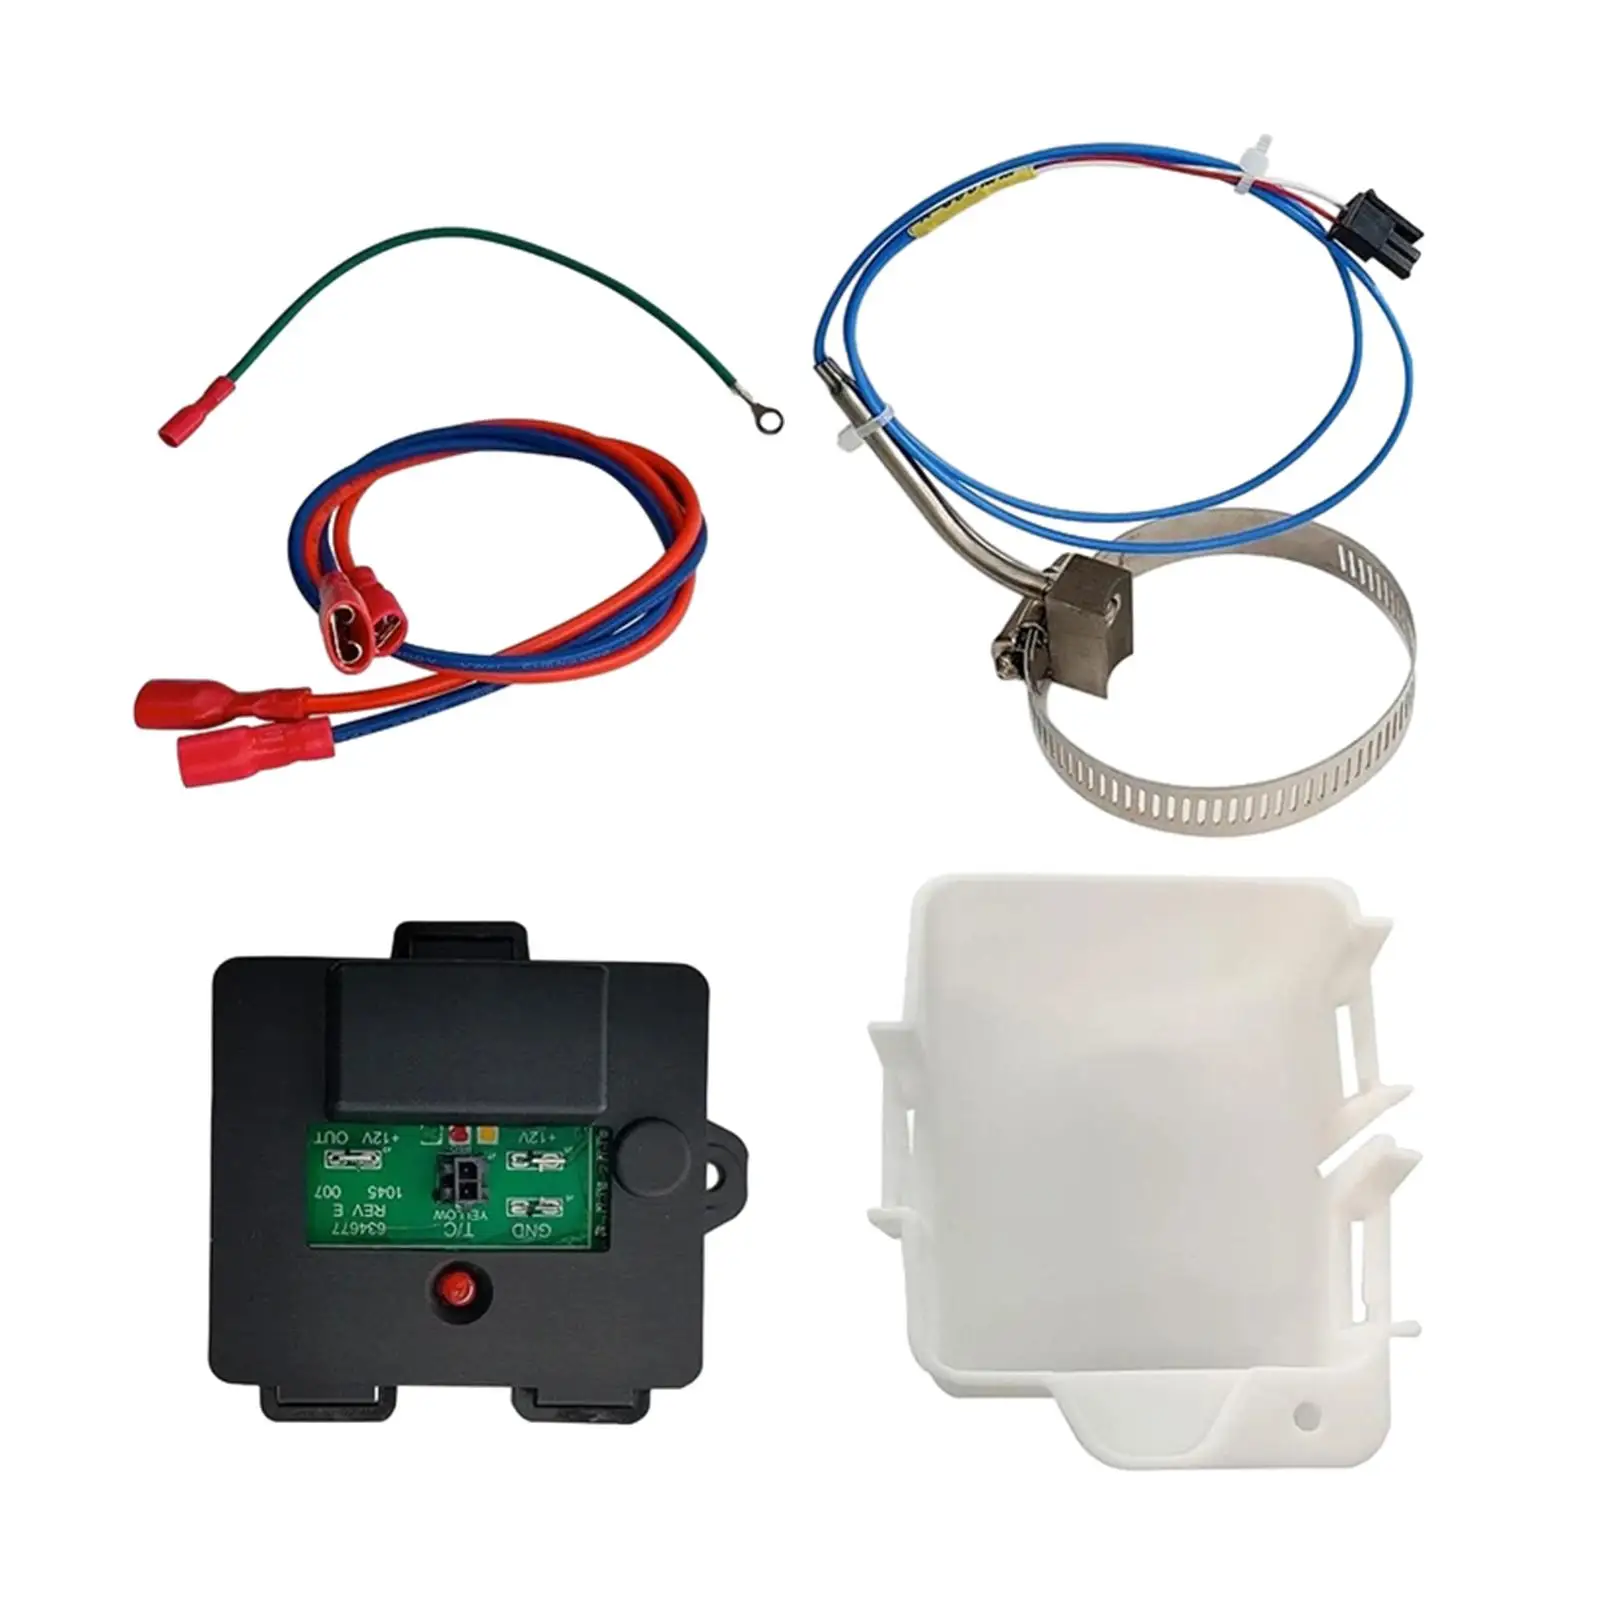 637360 Temp Monitor Control Kits Portable Replacement Parts Cooling Control Kits Professional Refrigerator Parts Home Kitchen